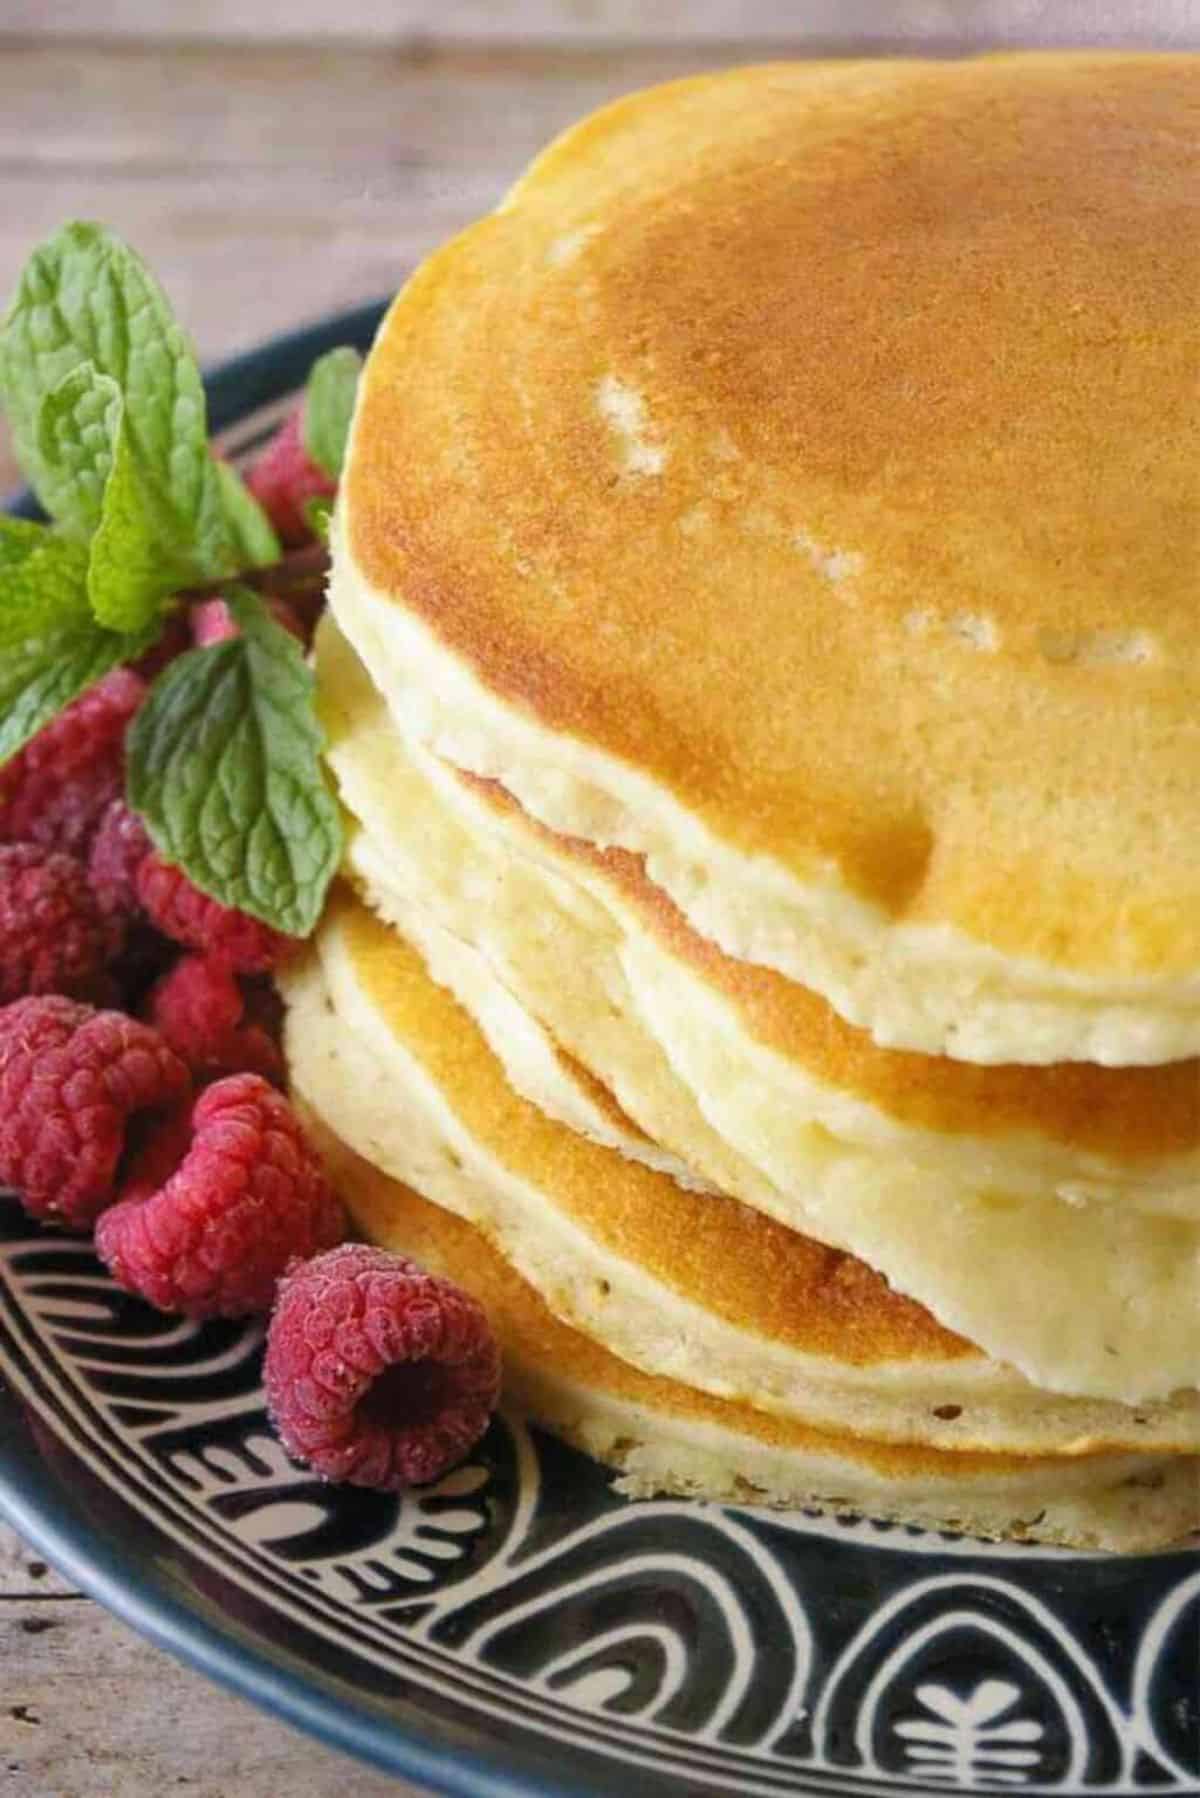 A stack of Fluffy Buttermilk Pancakes on a blue tray.